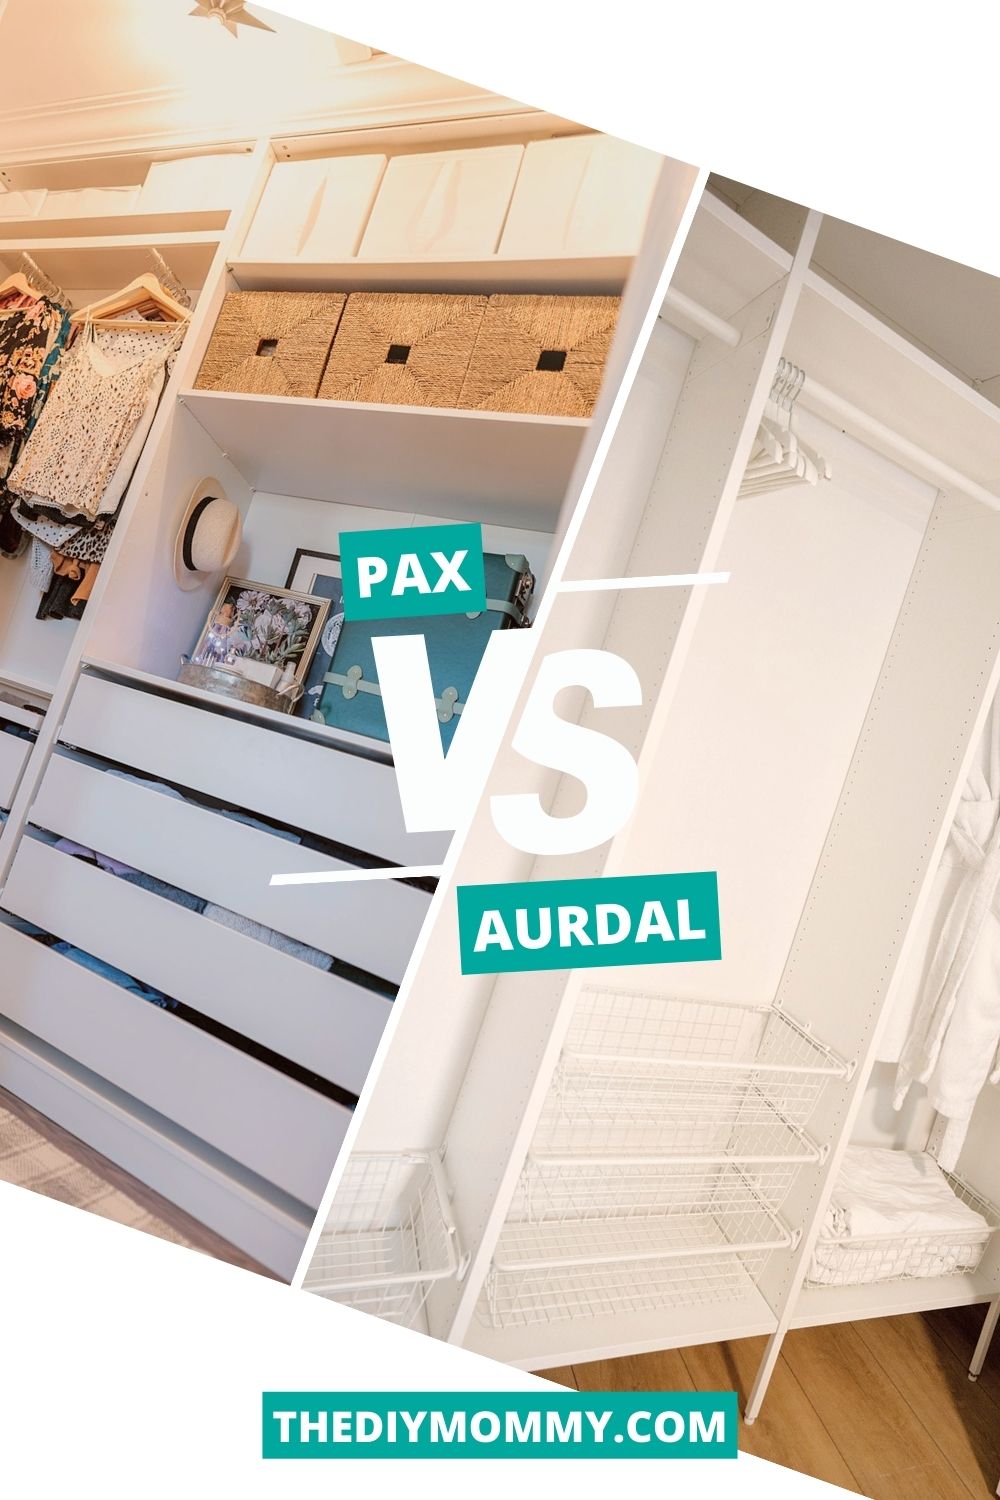 IKEA Closets: Which is the better system - PAX or AURDAL?